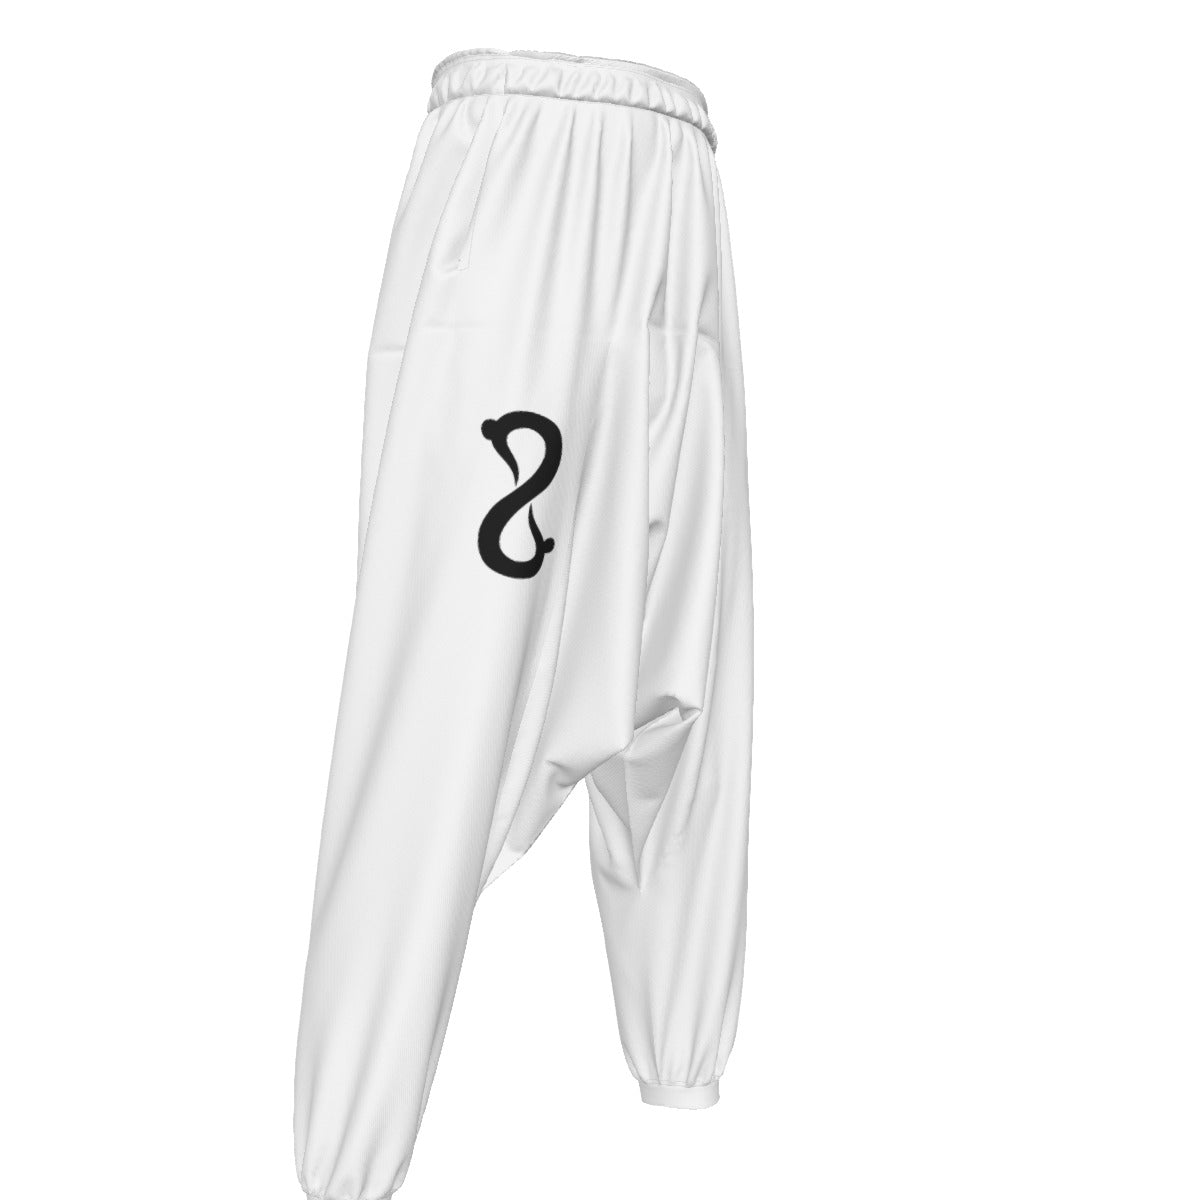 White Loose Baggy Yoga Pants- Men's Loose Trousers - Personal Hour for Yoga and Meditations 